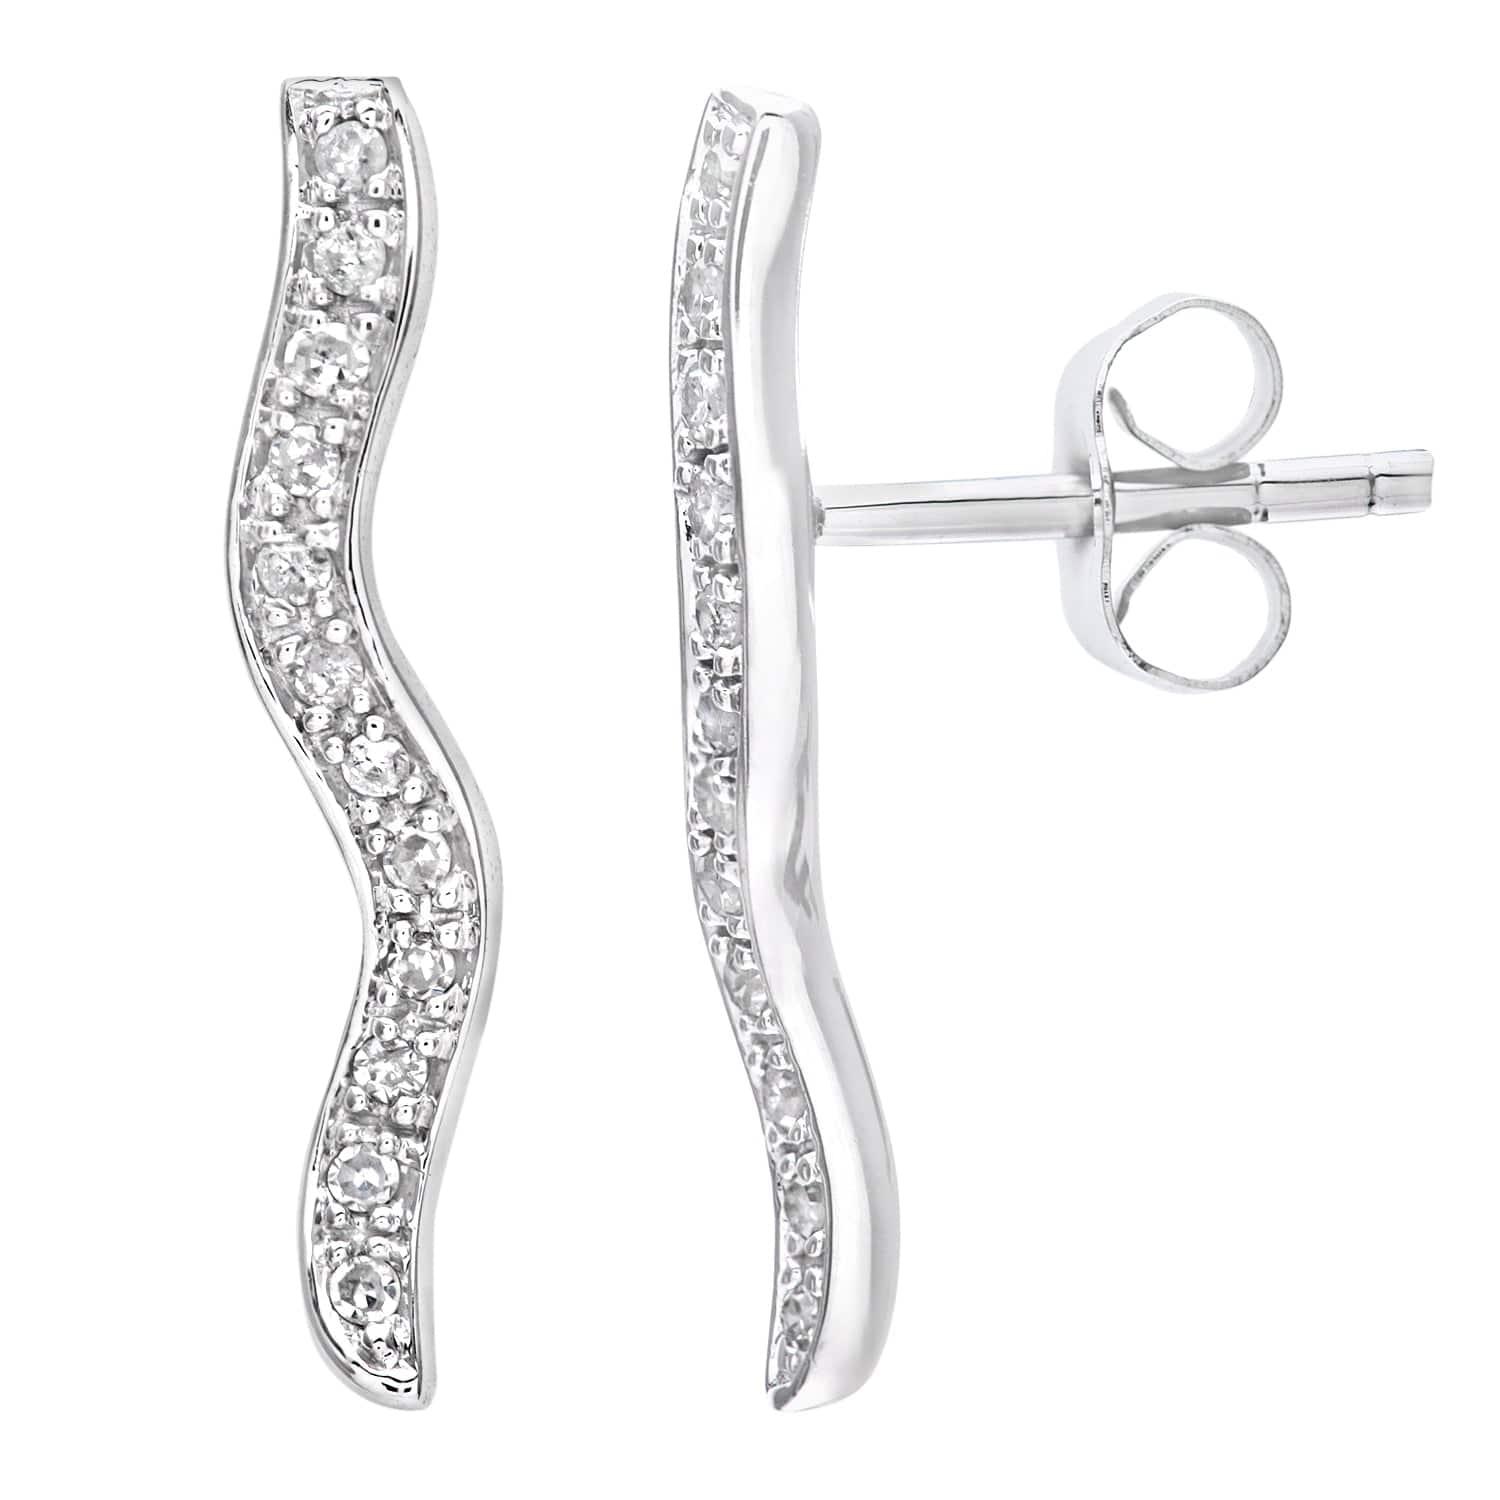 Lynora Luxe Earring White Gold 9ct / Diamond 9ct White Gold 0.15ct Diamond Twist Drop Earrings